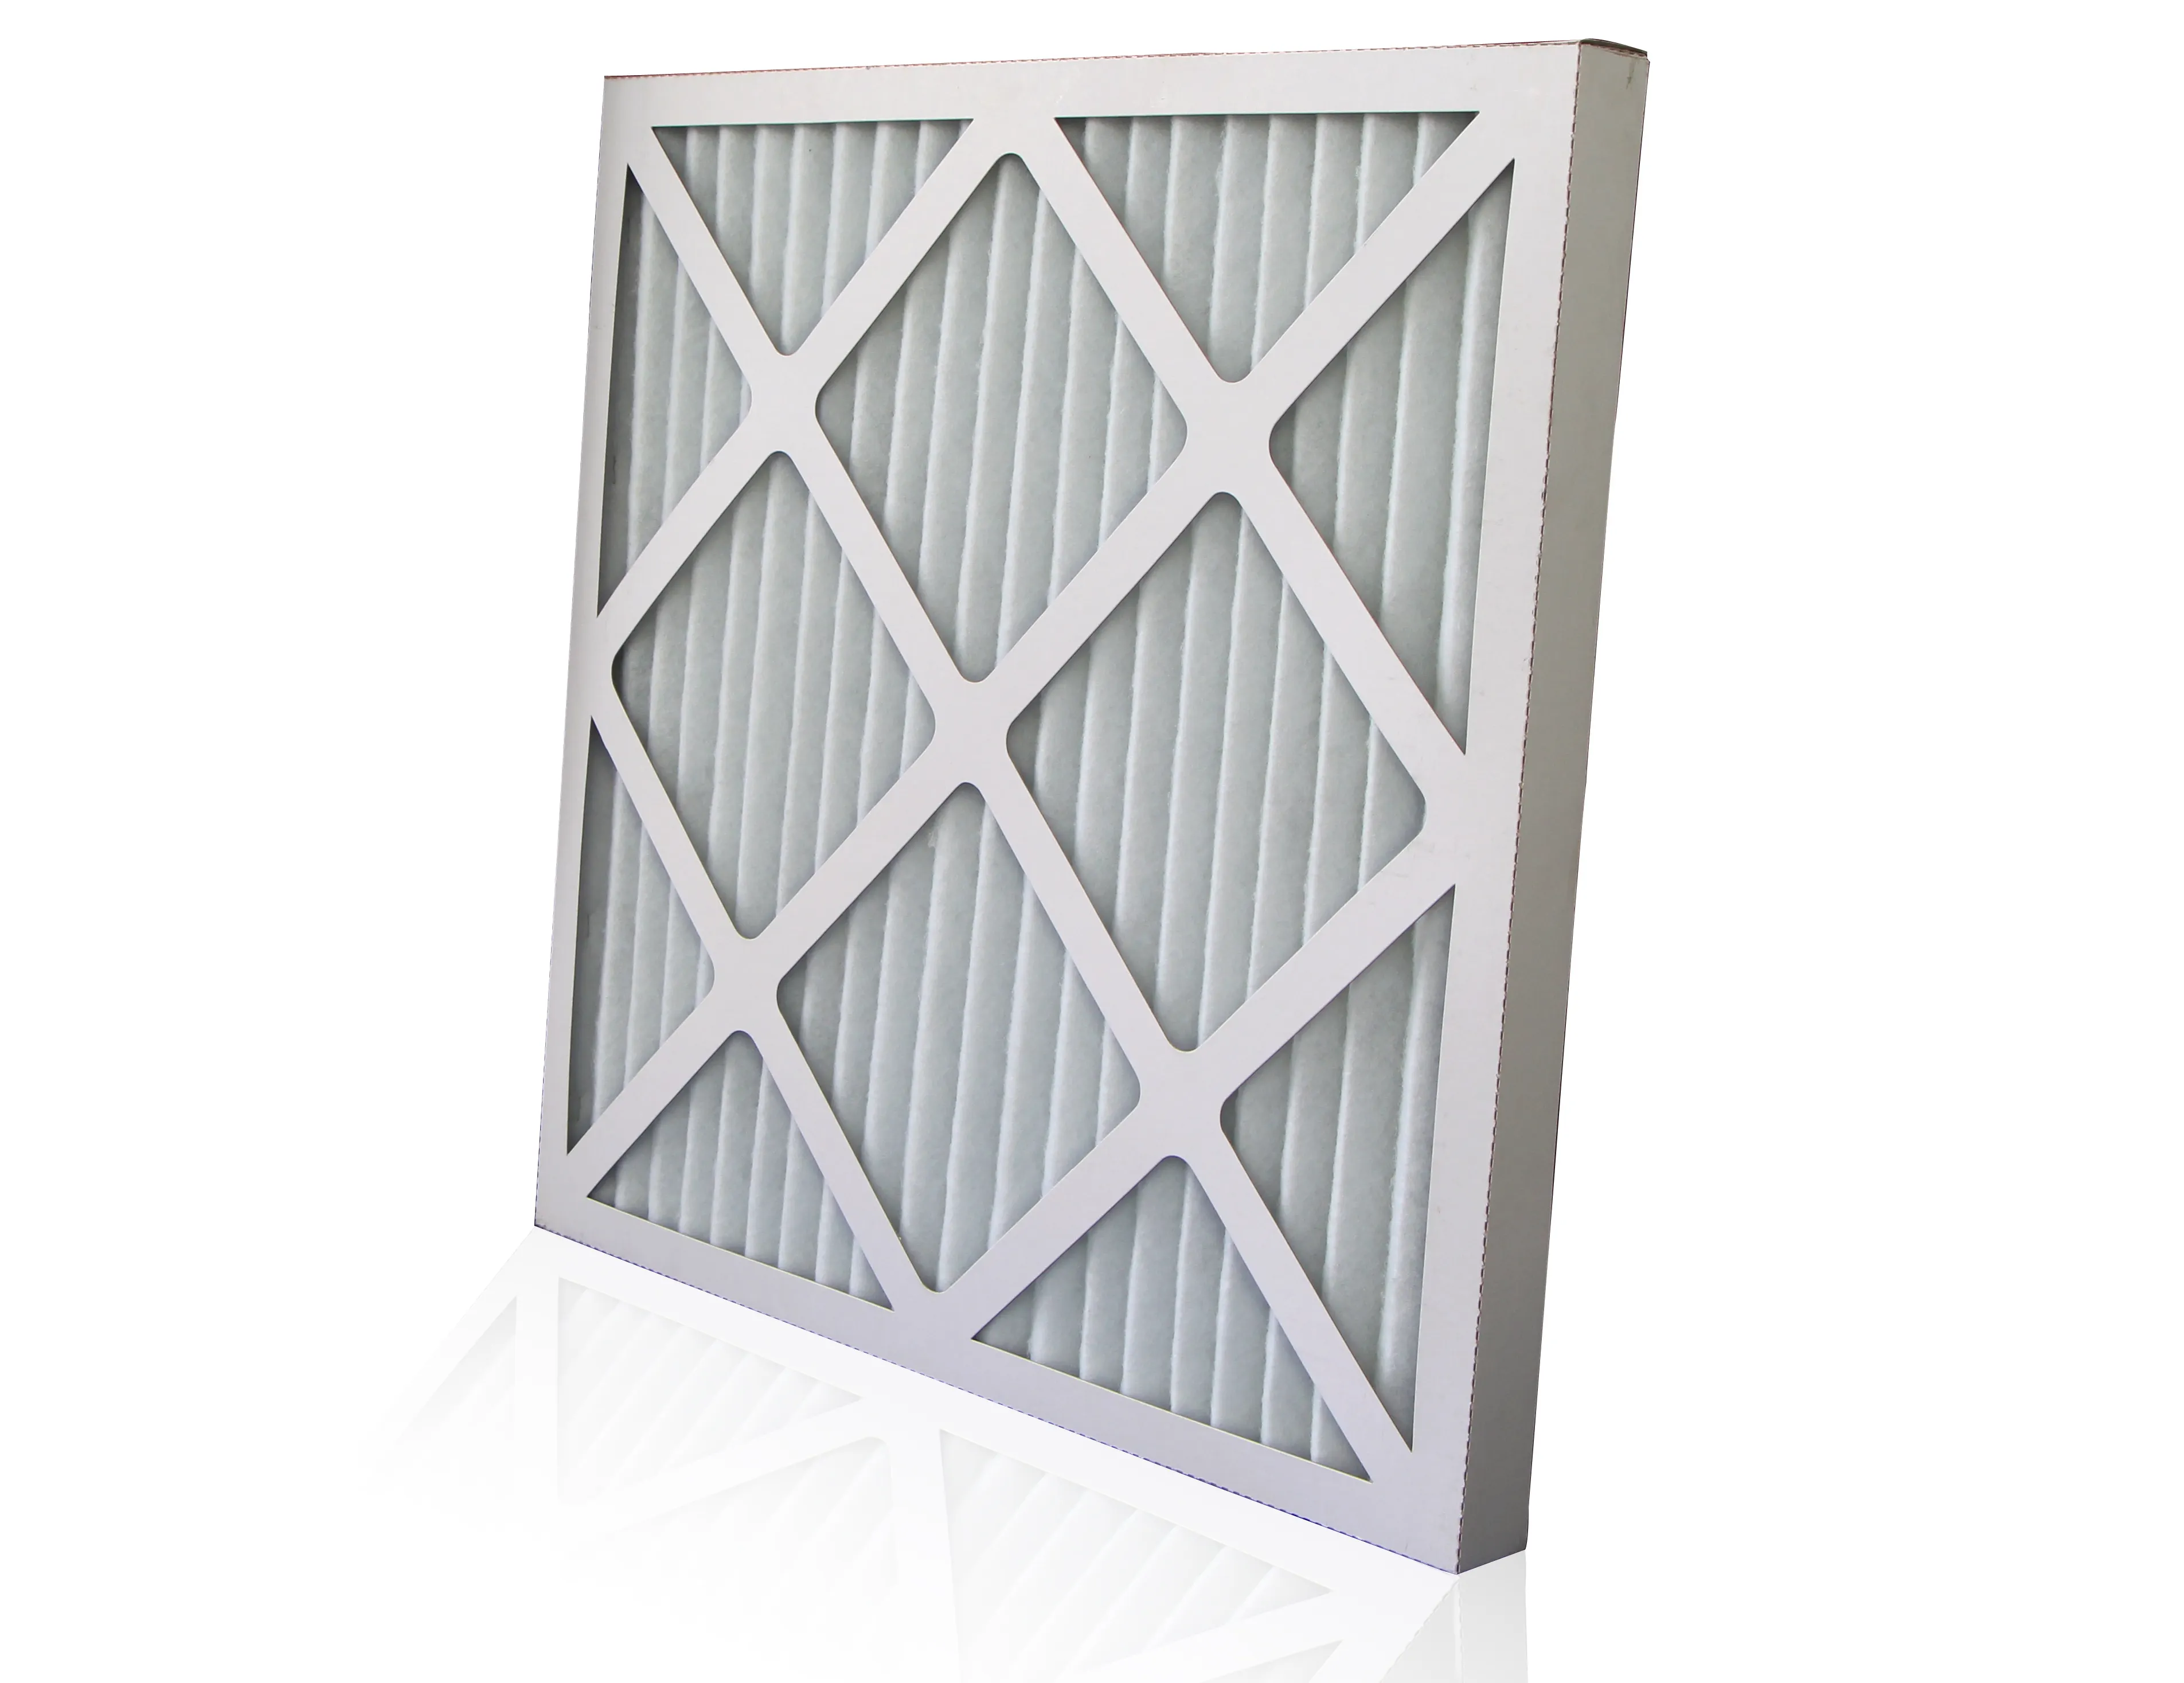 Cardboard Frame Panel Pleat G4 Air Filter Washable Pre Filter